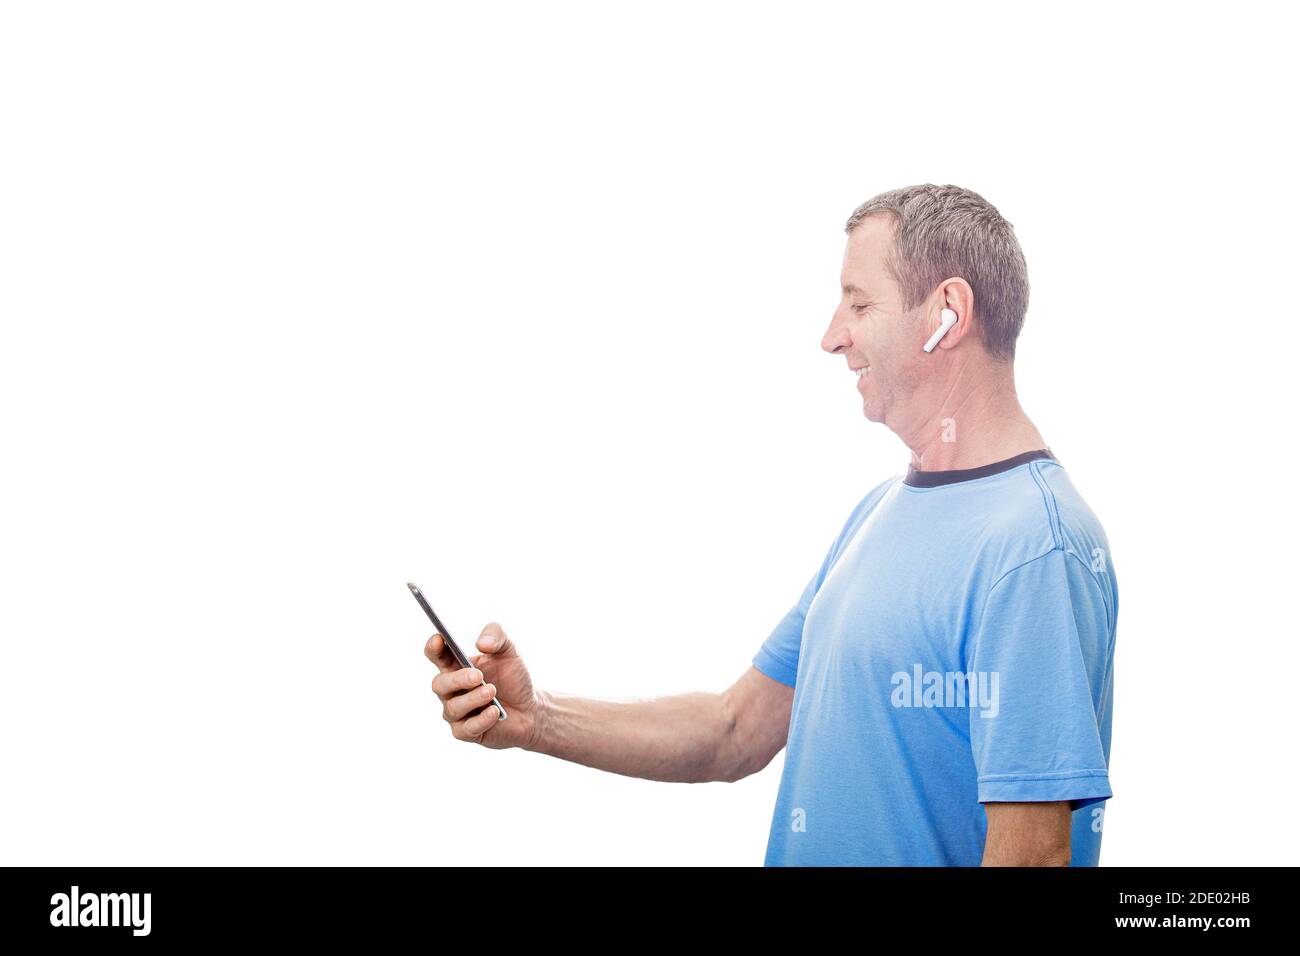 Smiling Middle aged man using  smartphone texting while listening to music over white background . Man listening to music or media on his mobile phone Stock Photo